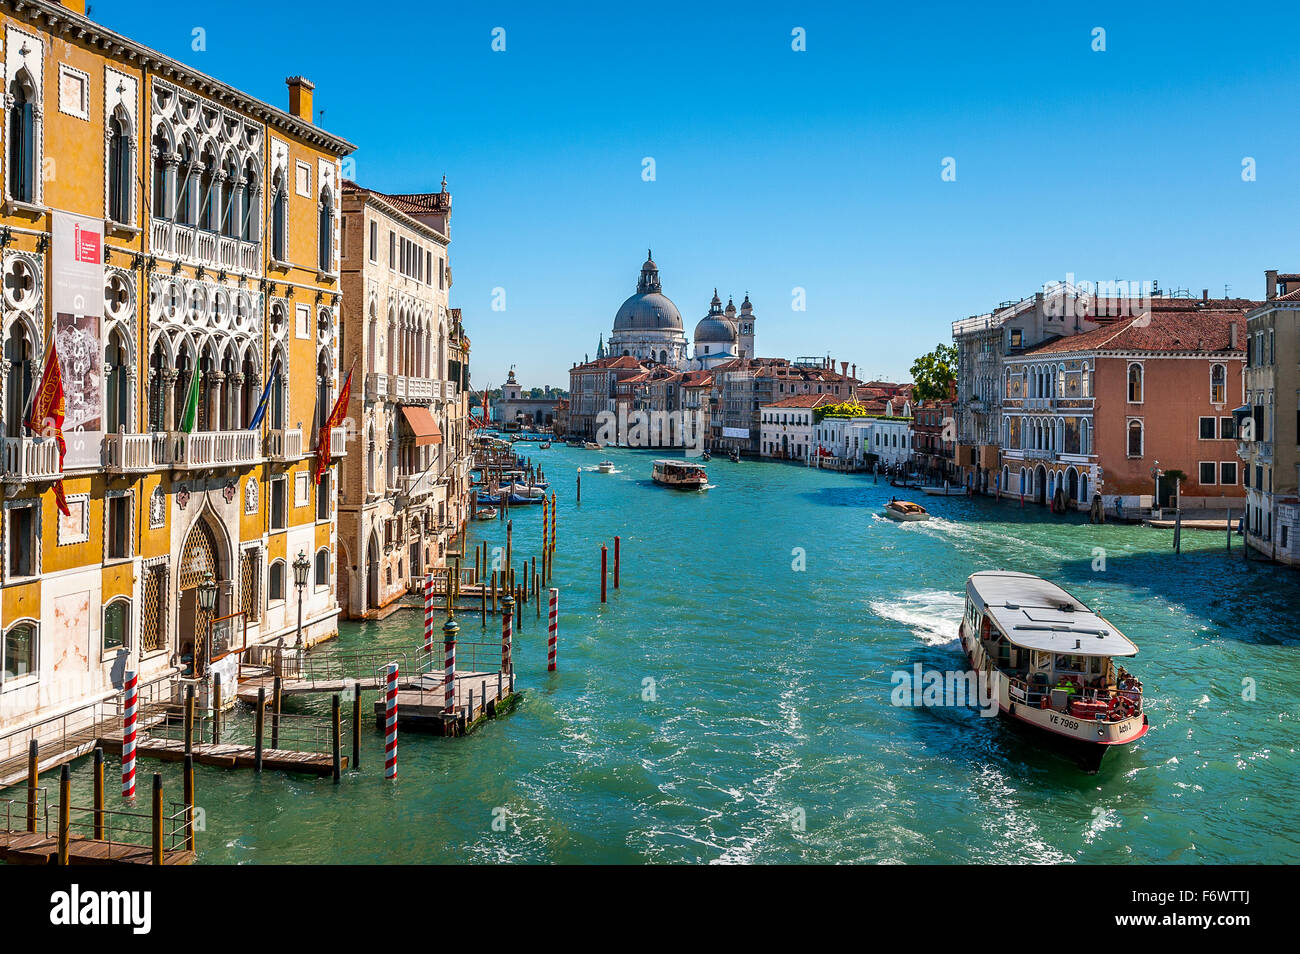 Stunning view of boats on the Grand Canal in Venice with Santa Maria Della Salute in the background. Stock Photo